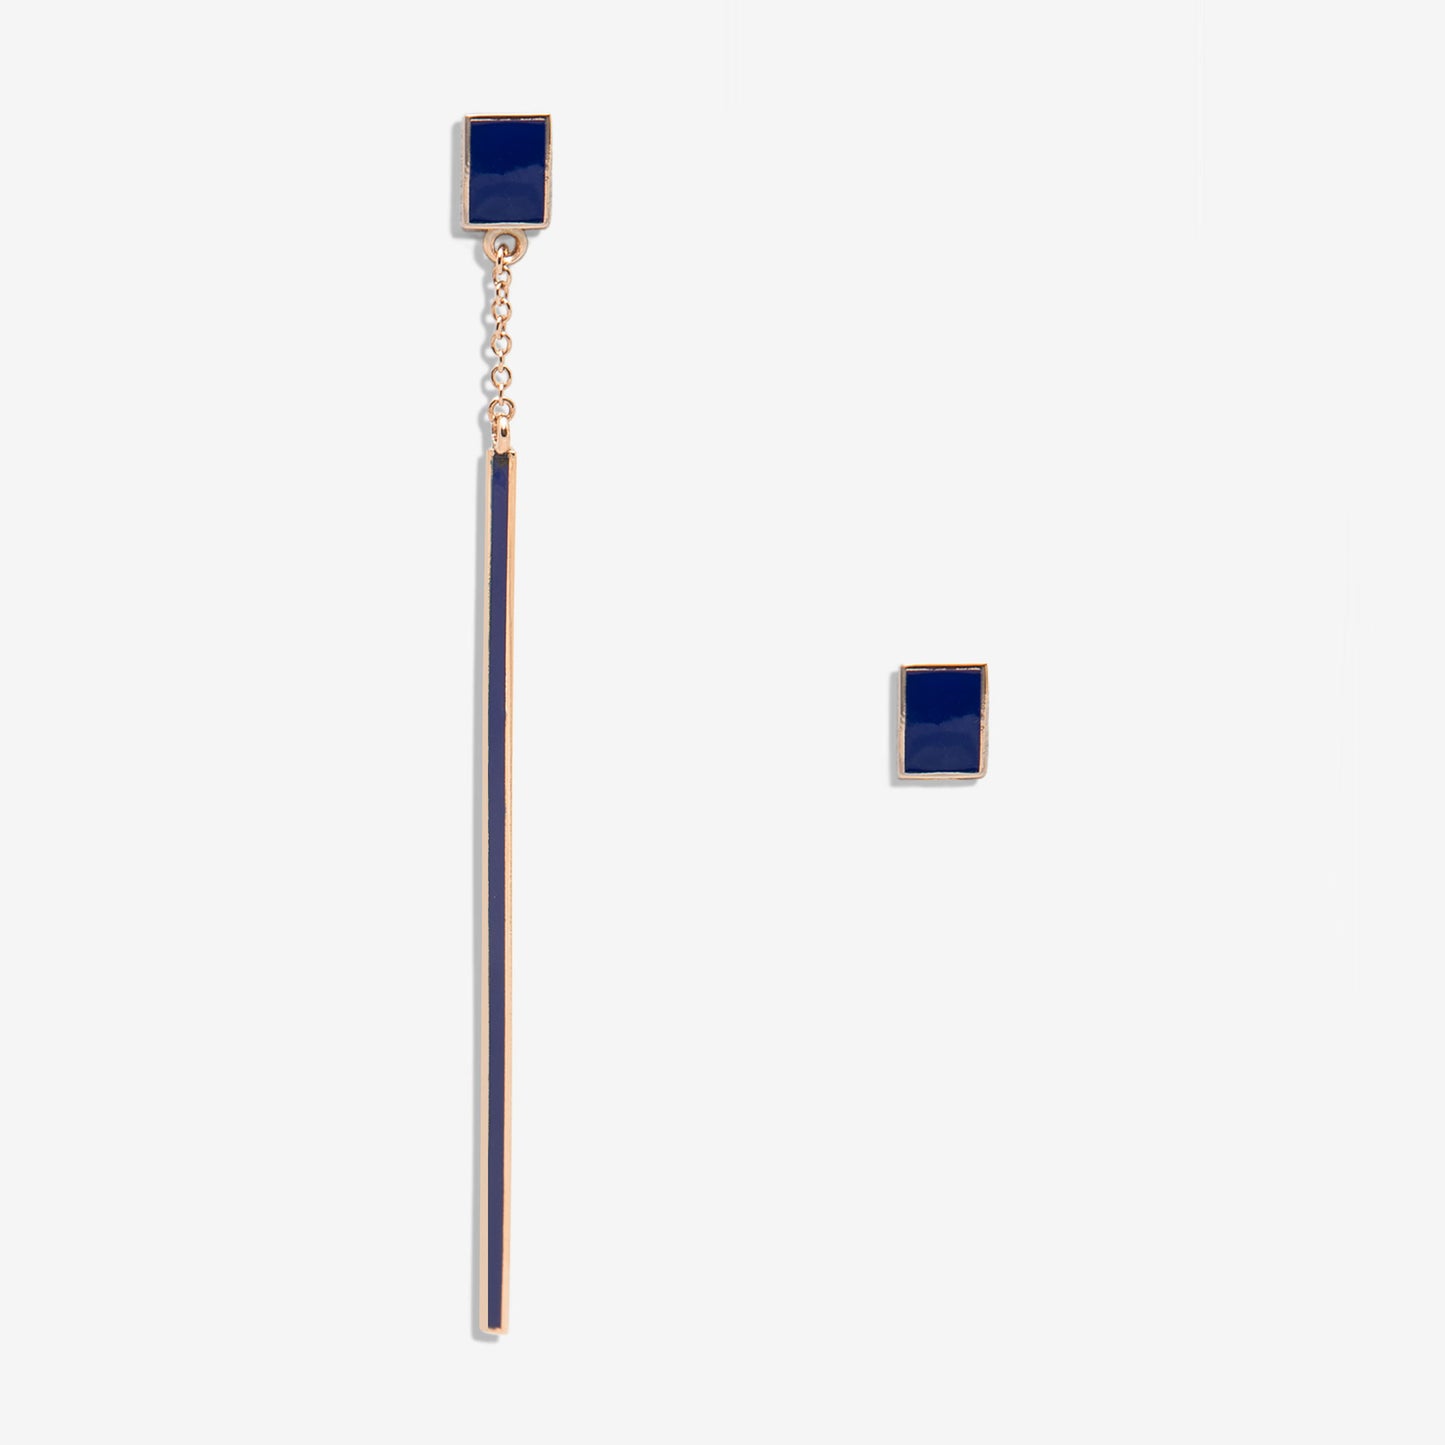 Floating dark blue drop earring and rectangle